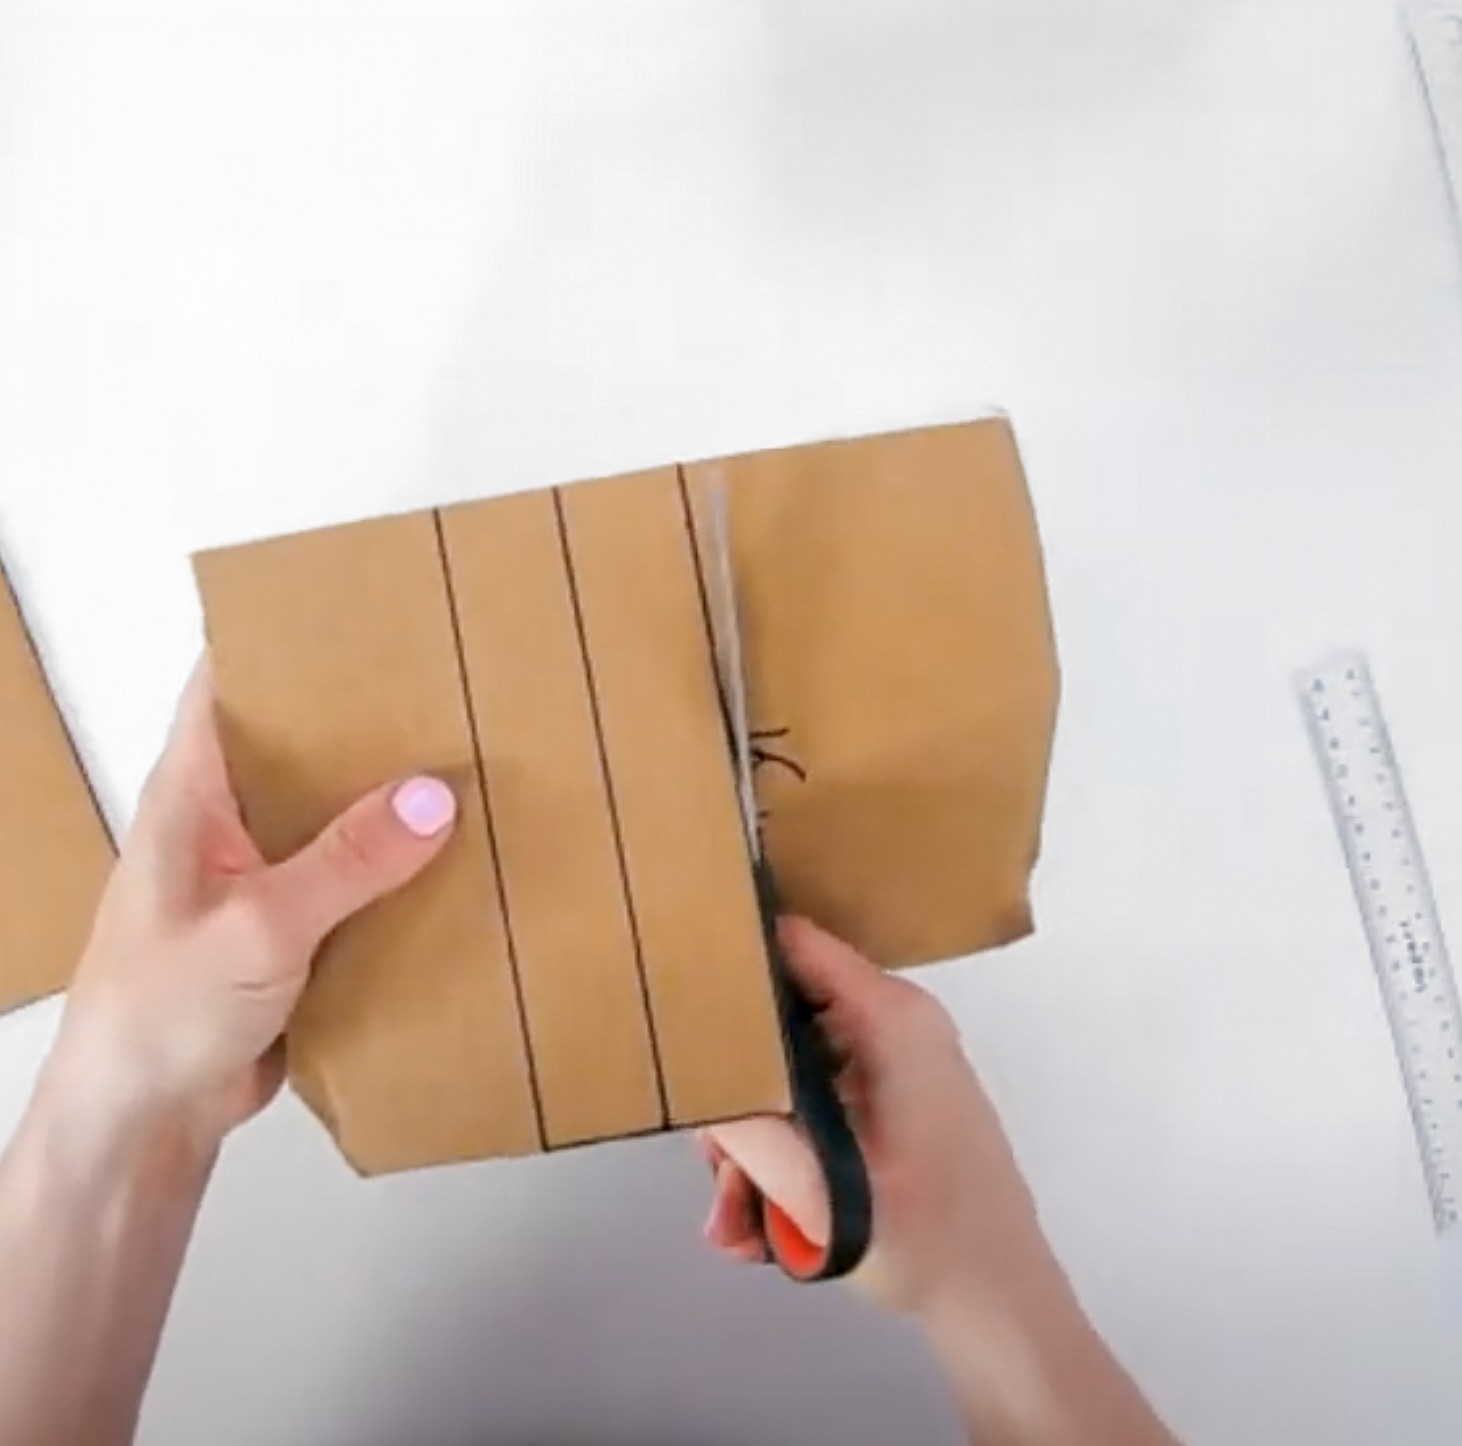 A hand cuts out struts of cardboard.